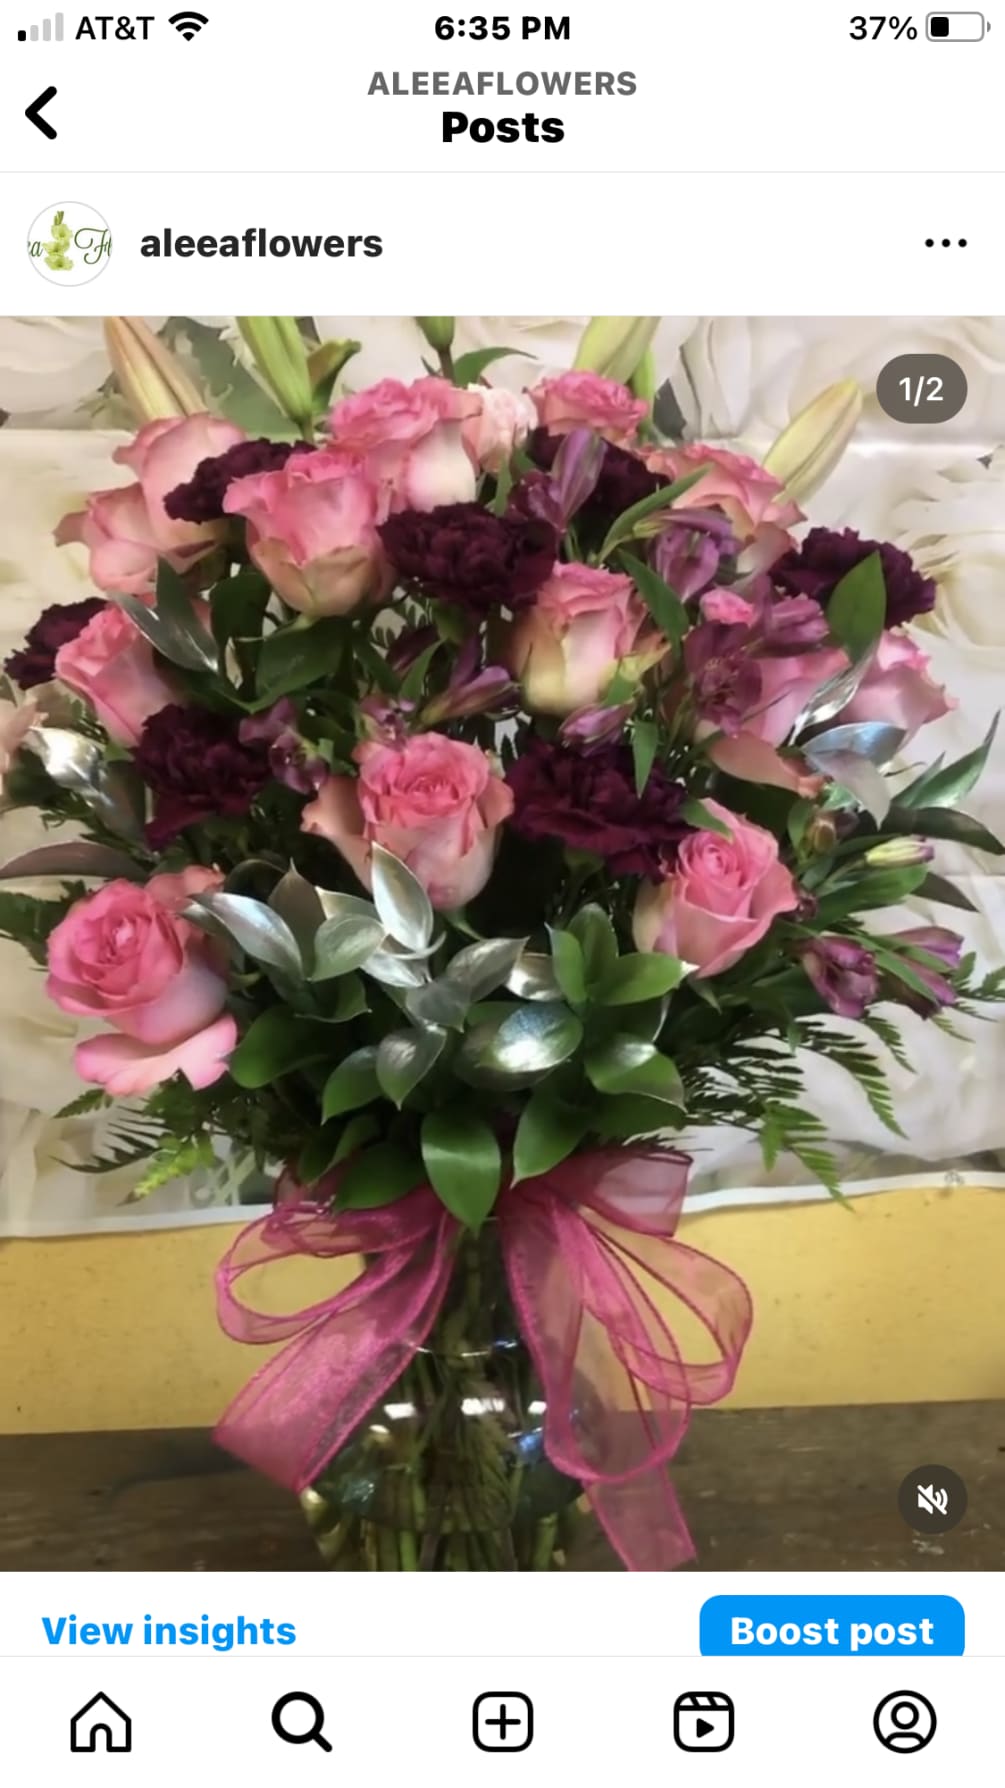 12 PINK ROSES, 6 PURPLE CARNATIONS, PURPLE ALSTROMERIA AND SILVER RUSCUS FILLER.